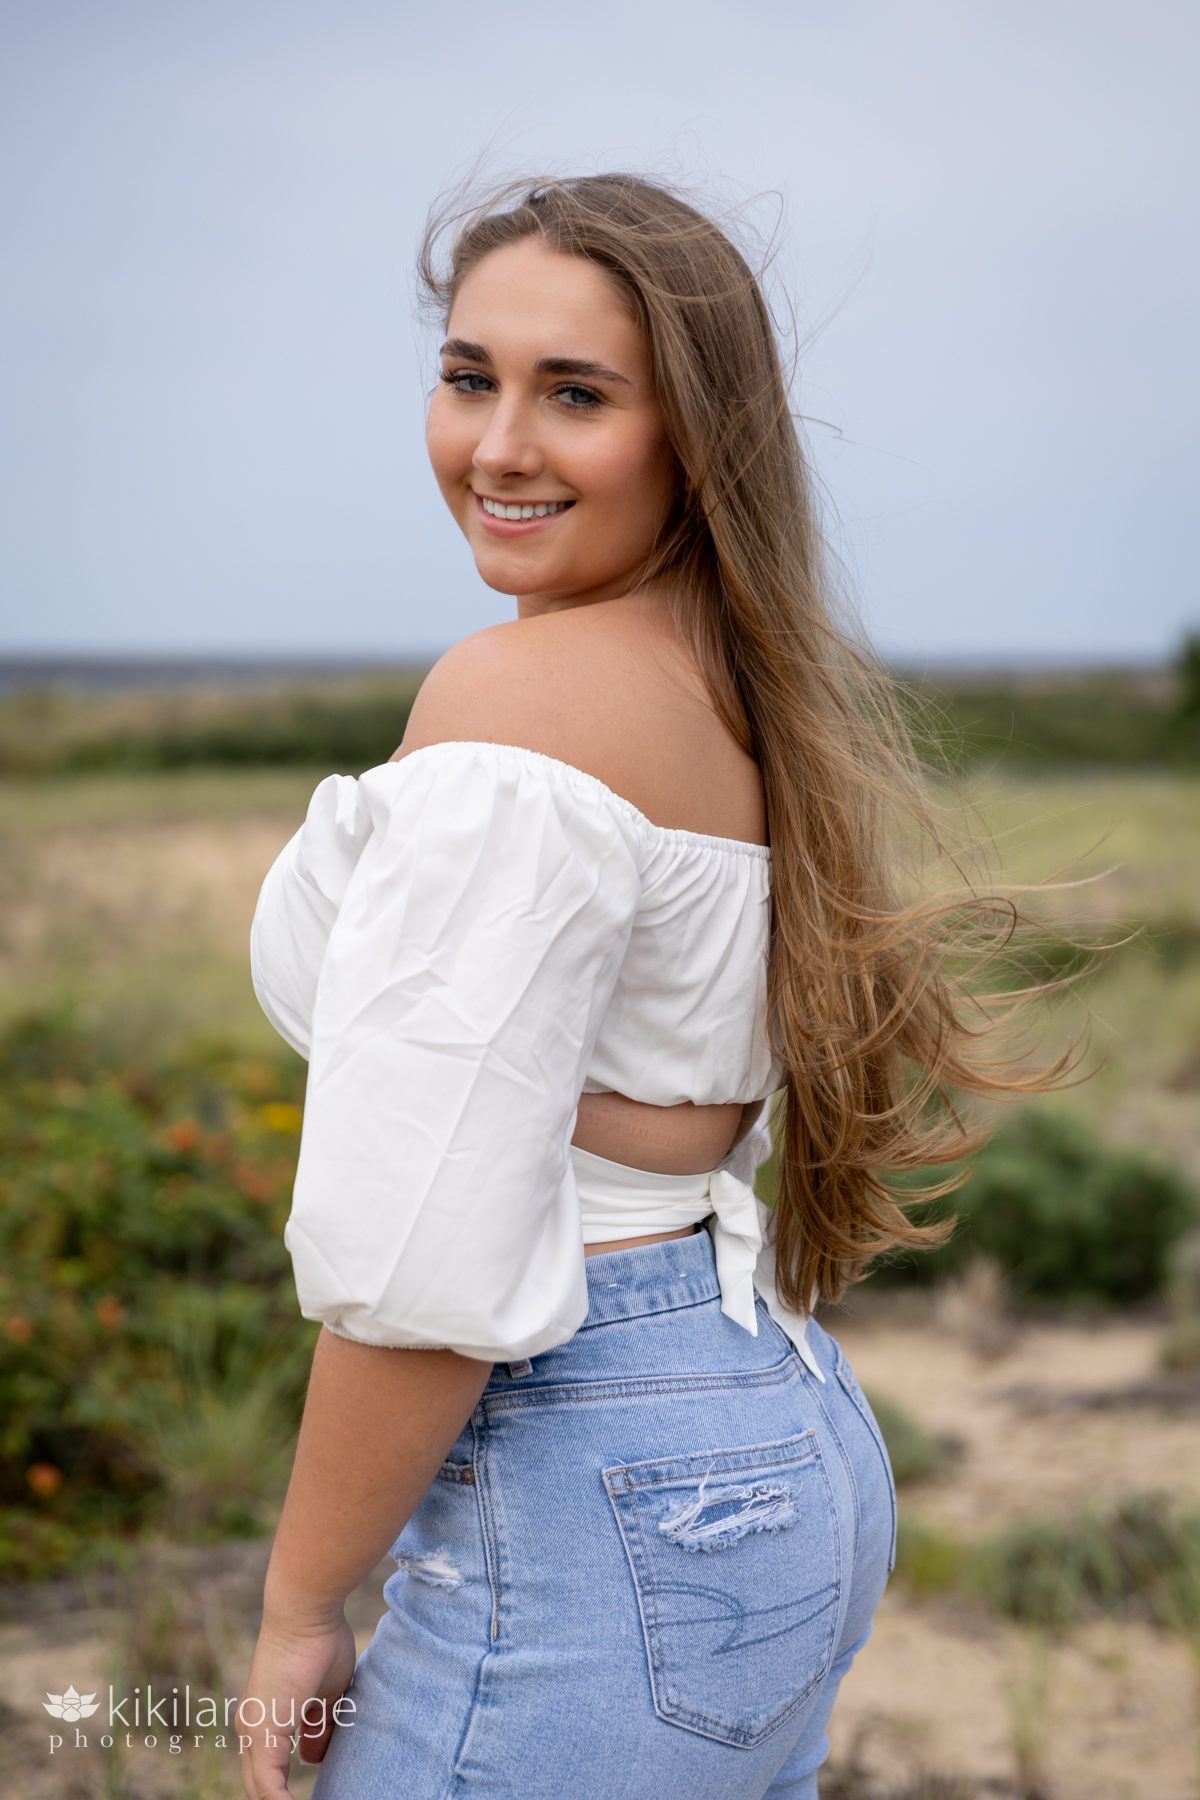 Triton Senior Portrait Girl in Jeans with white top tied in back at beach looking over shoulder